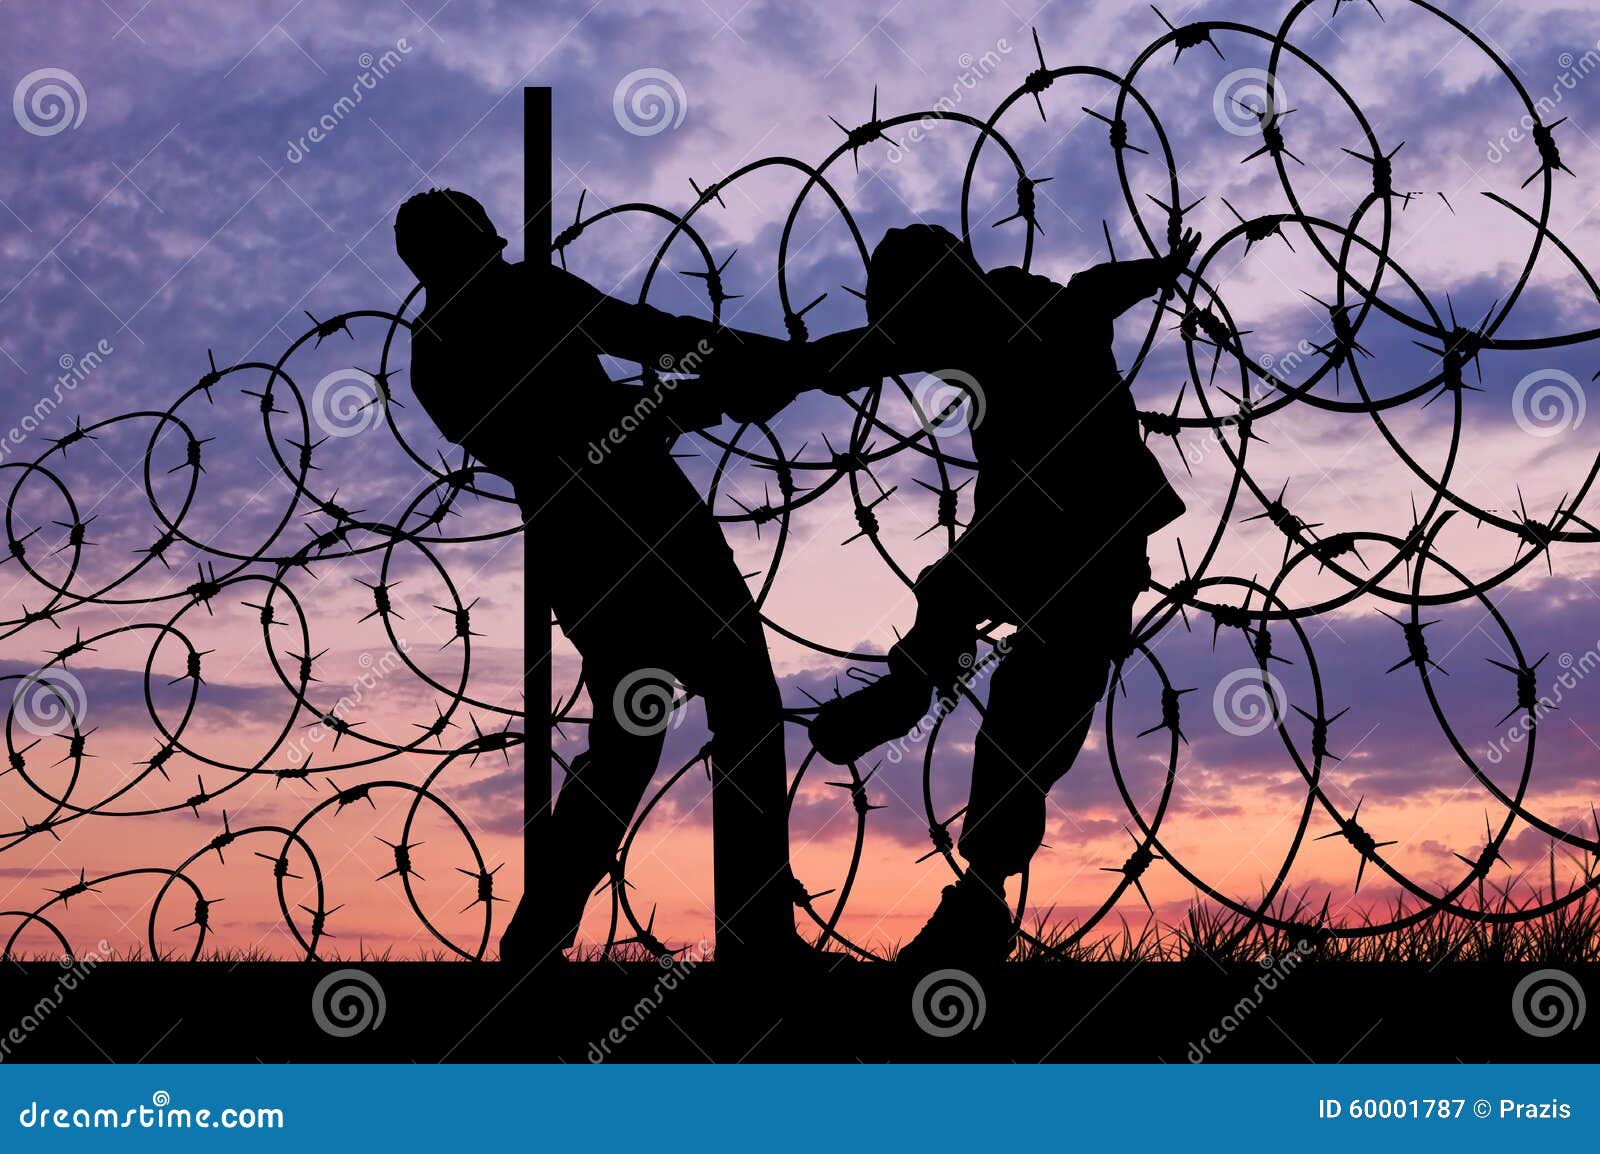 silhouette of refugees and barbed wire